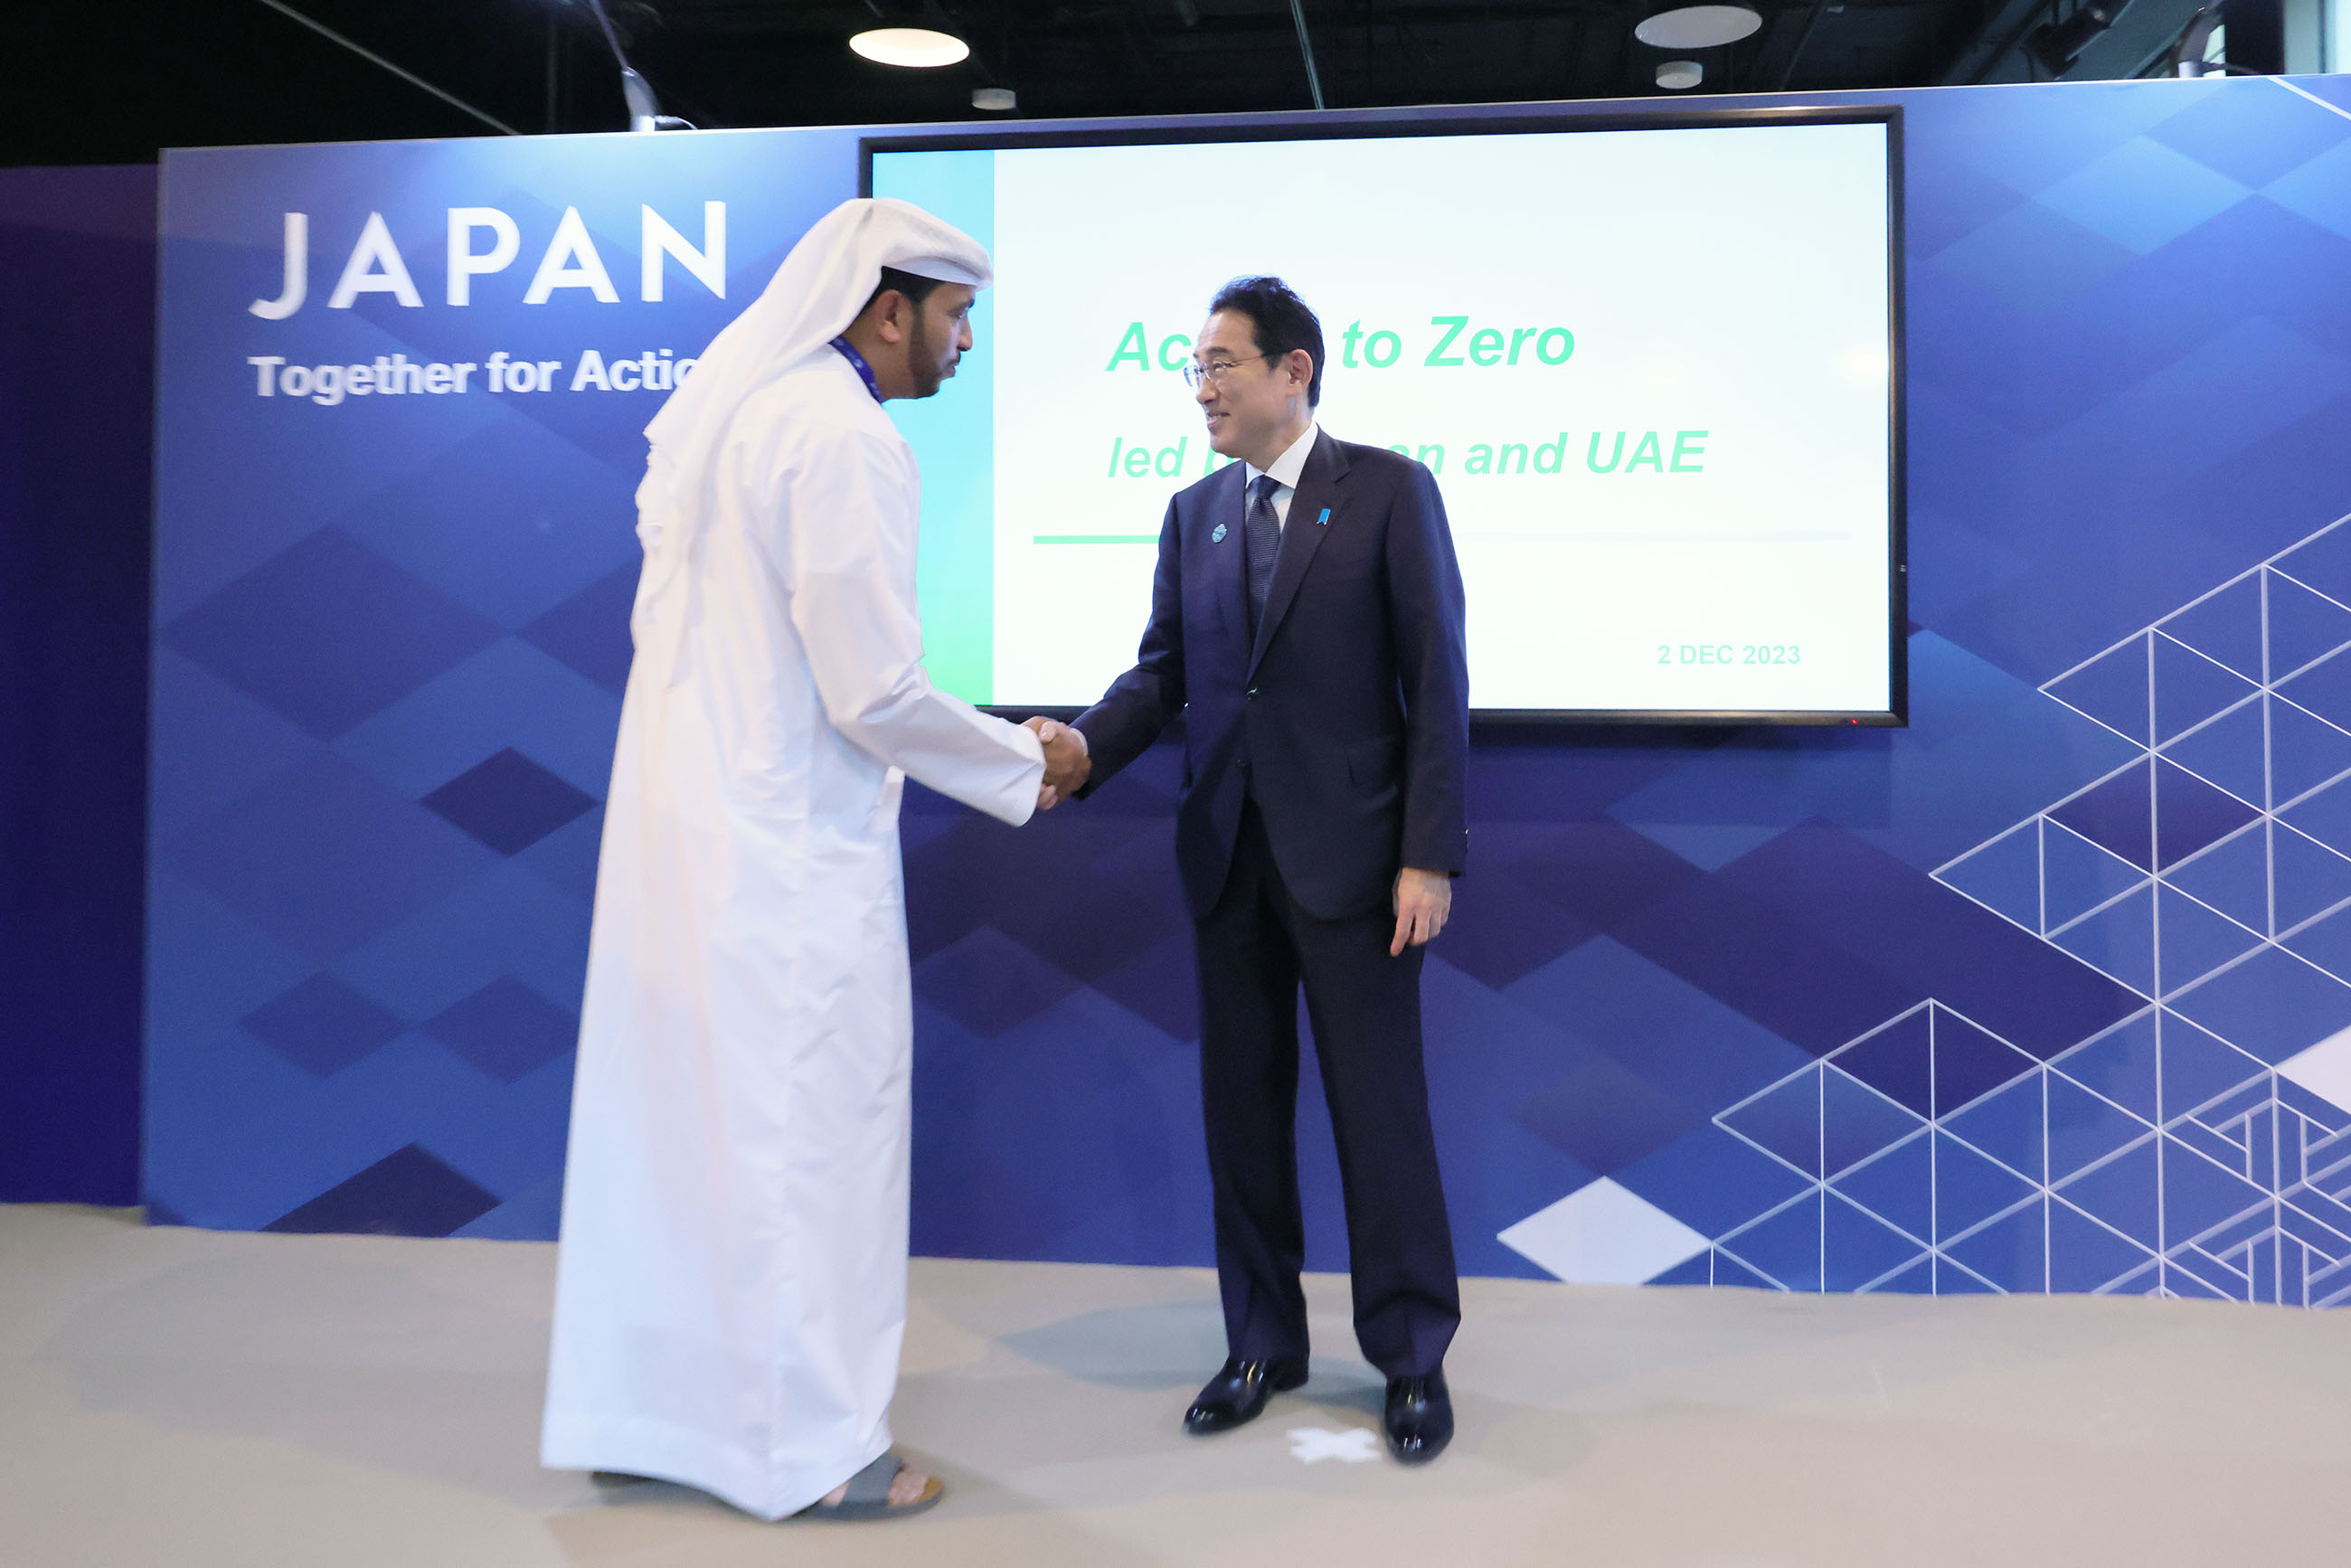 Action to Zero led by Japan and UAE (12)